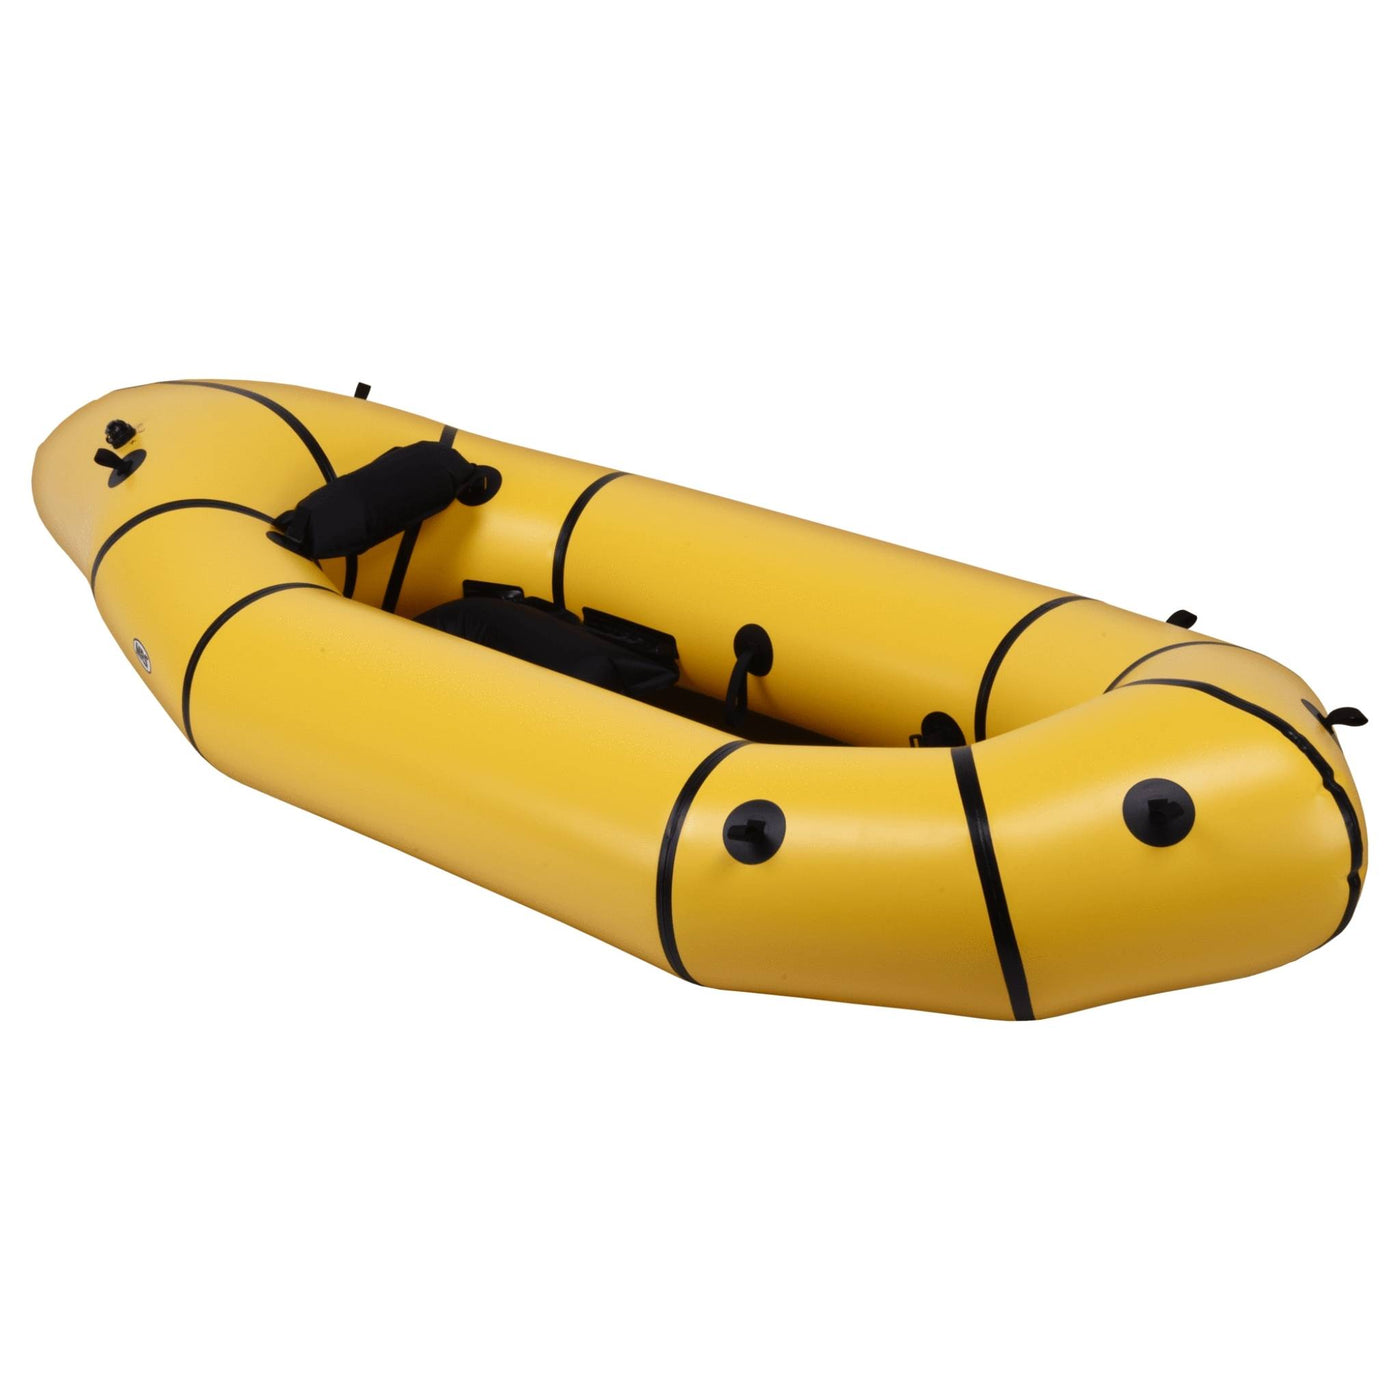 Micro Rafting Systems Tulo Packraft NZ | MRS Lightweight Packrafts | Further Faster Christchurch NZ #mrs-yellow